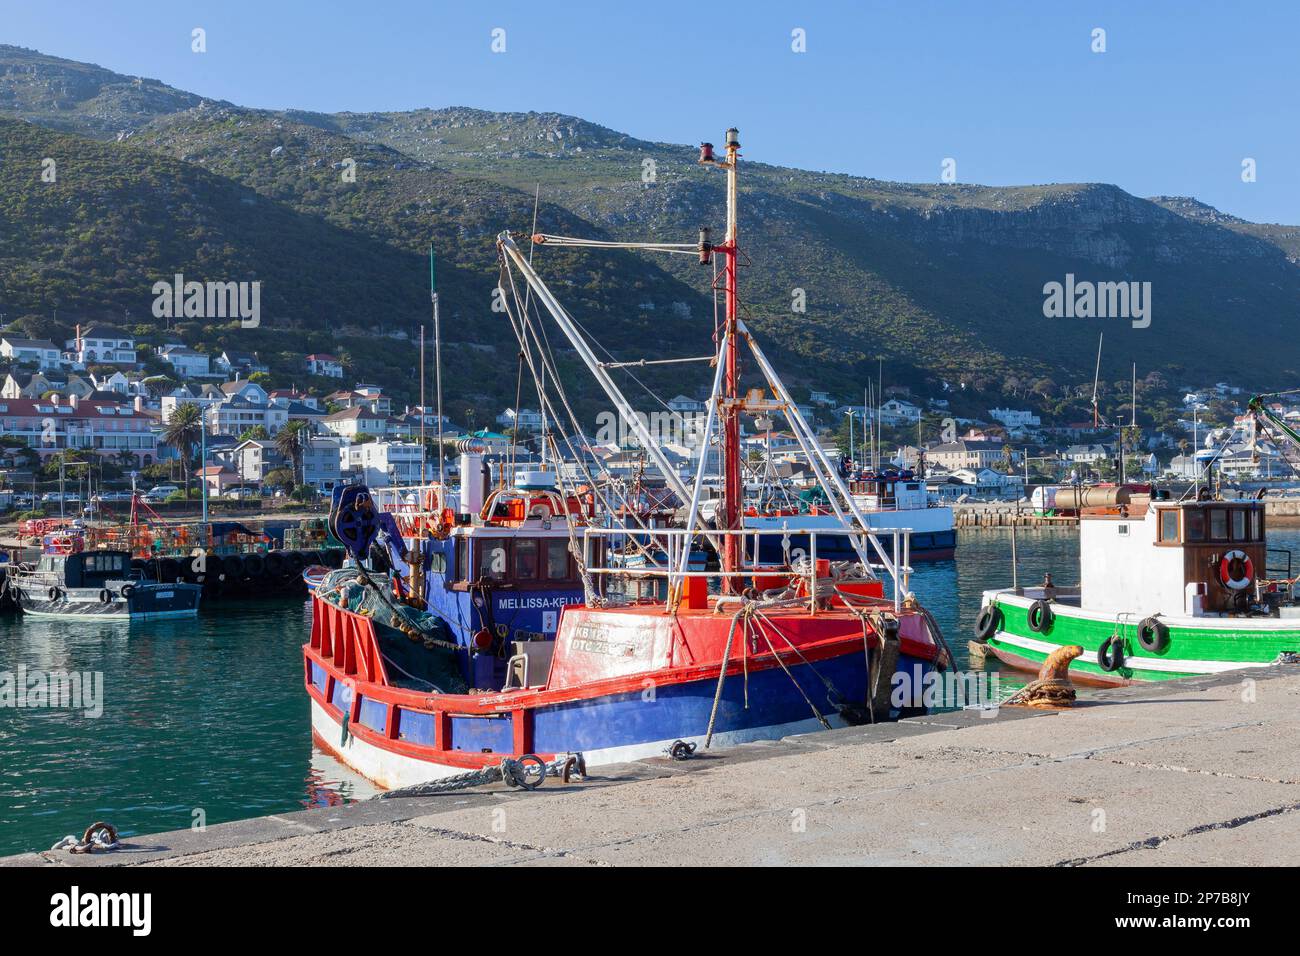 Fishing boats moored in Kalk Bay Harbour, Cape Town, Western Cape, South Africa at sunset with Kalk Bay visible behind Stock Photo